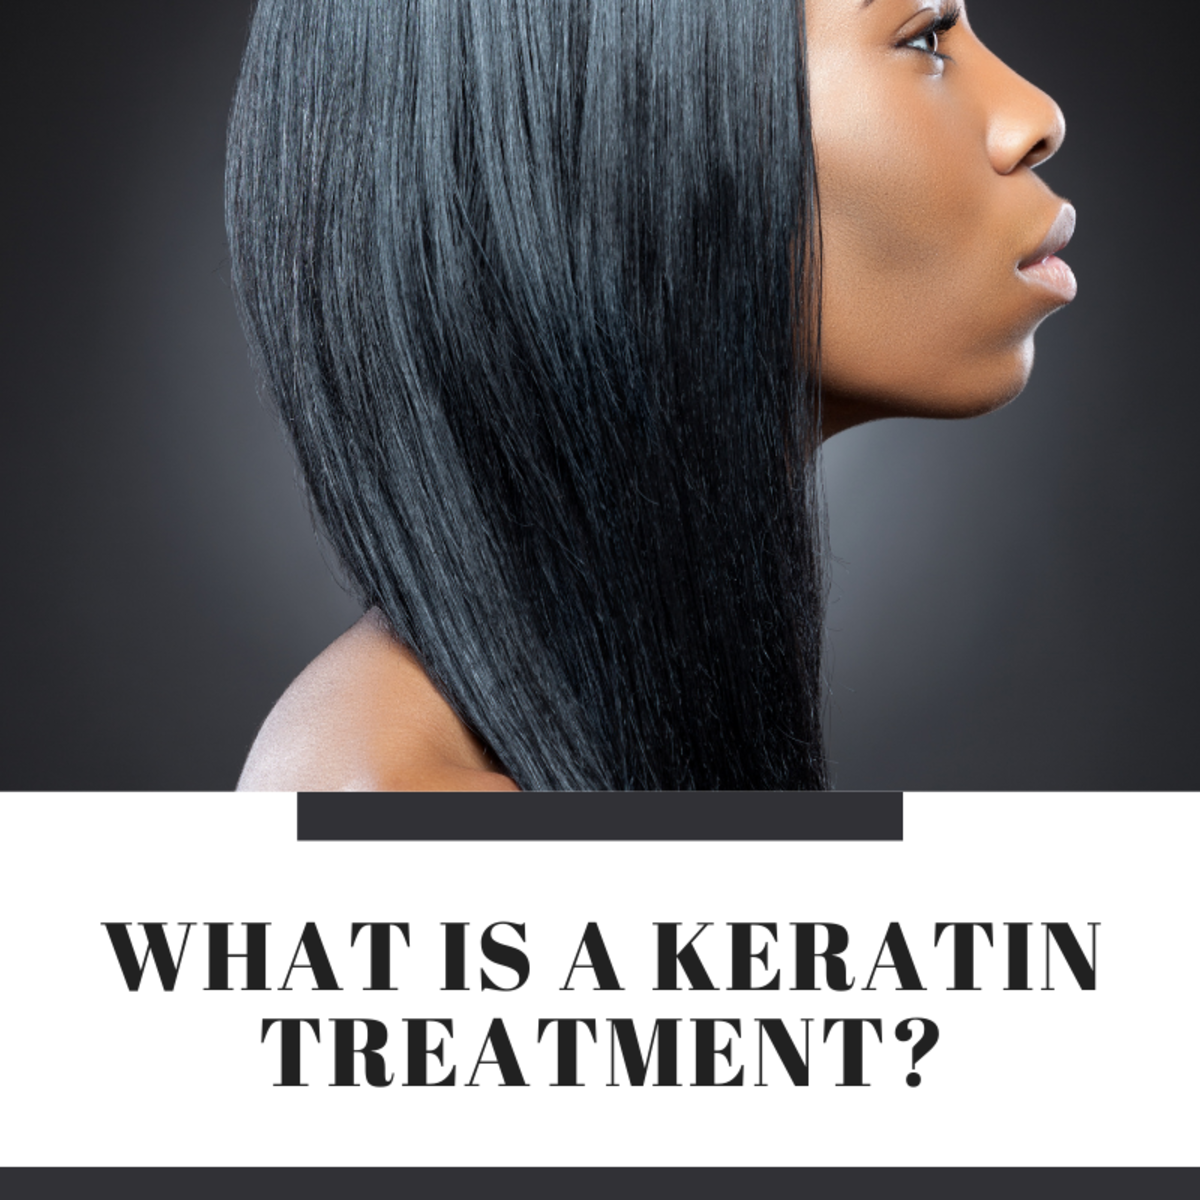 How keratin treatment is done